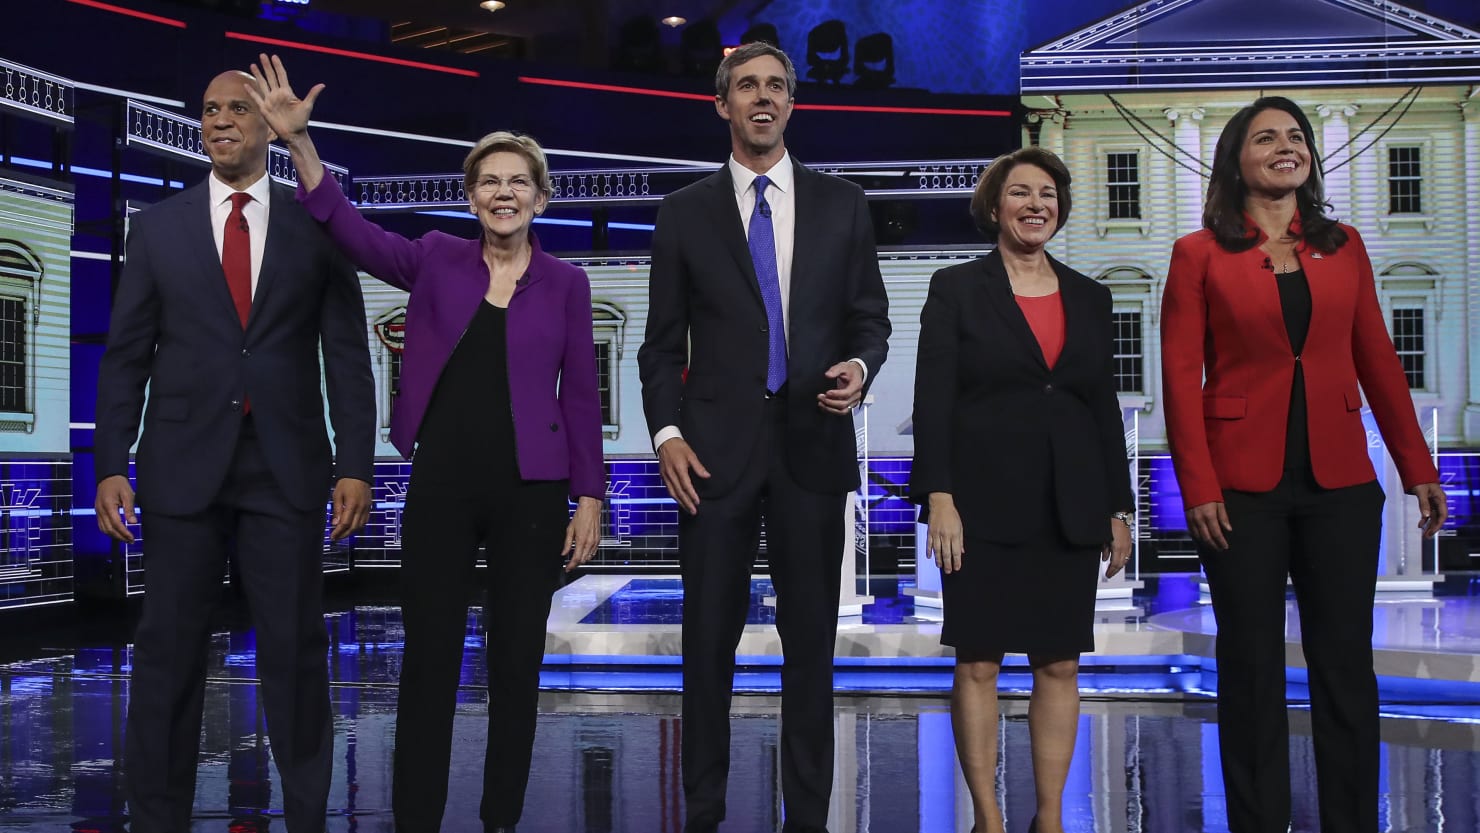 15.3 Million Viewers Watched First Democratic Primary Debate